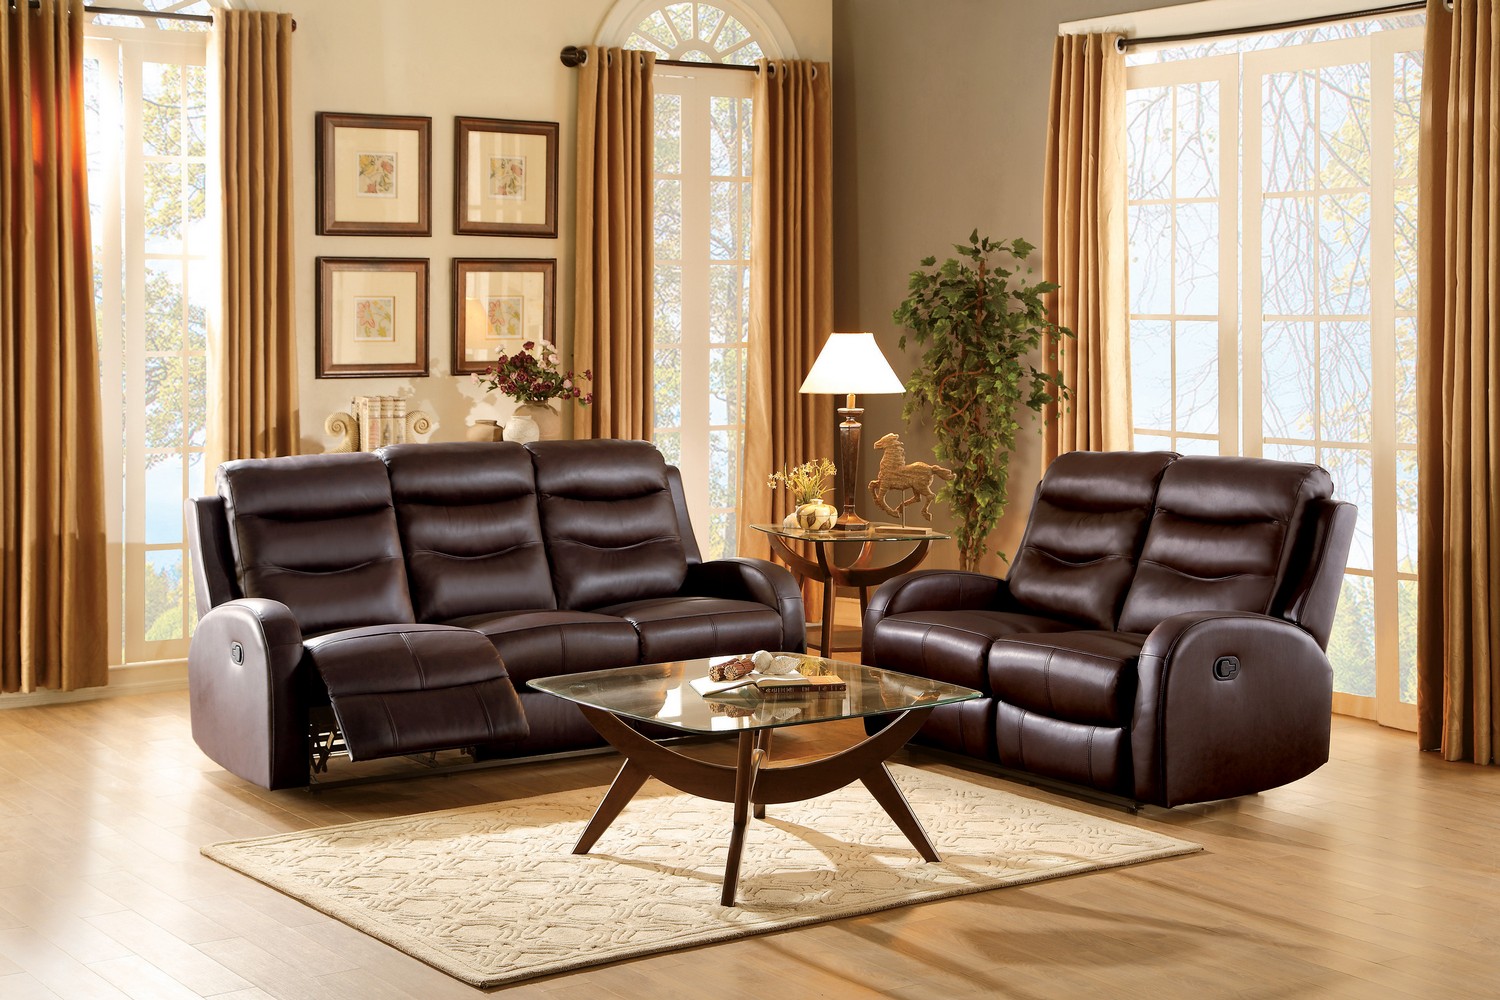 Homelegance Coppins Reclining Sofa Set - Top Grain Leather Match - Chocolate